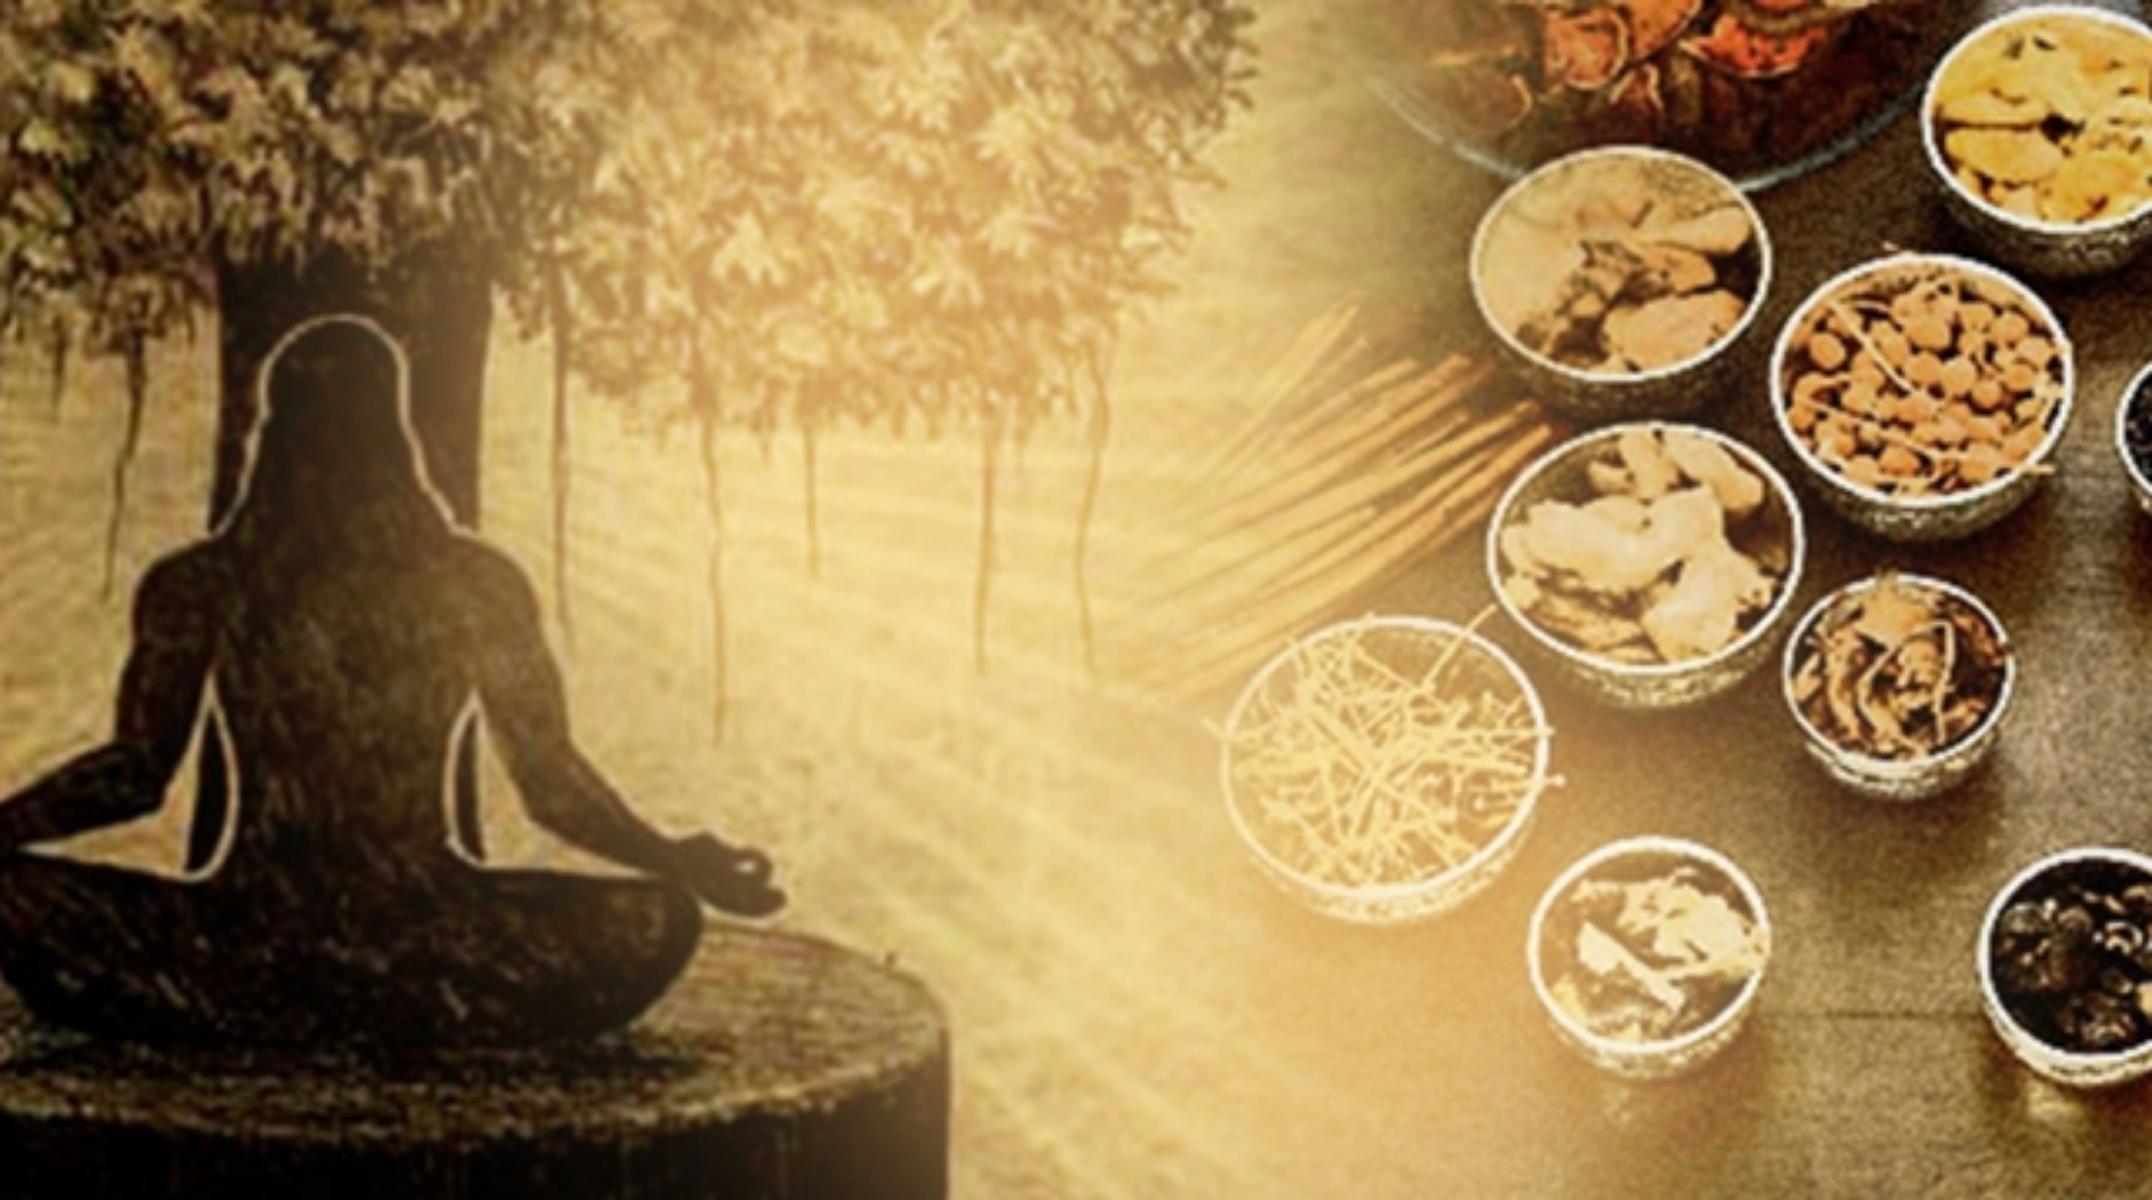 Ayurveda: The SCIENCE Of LIFE